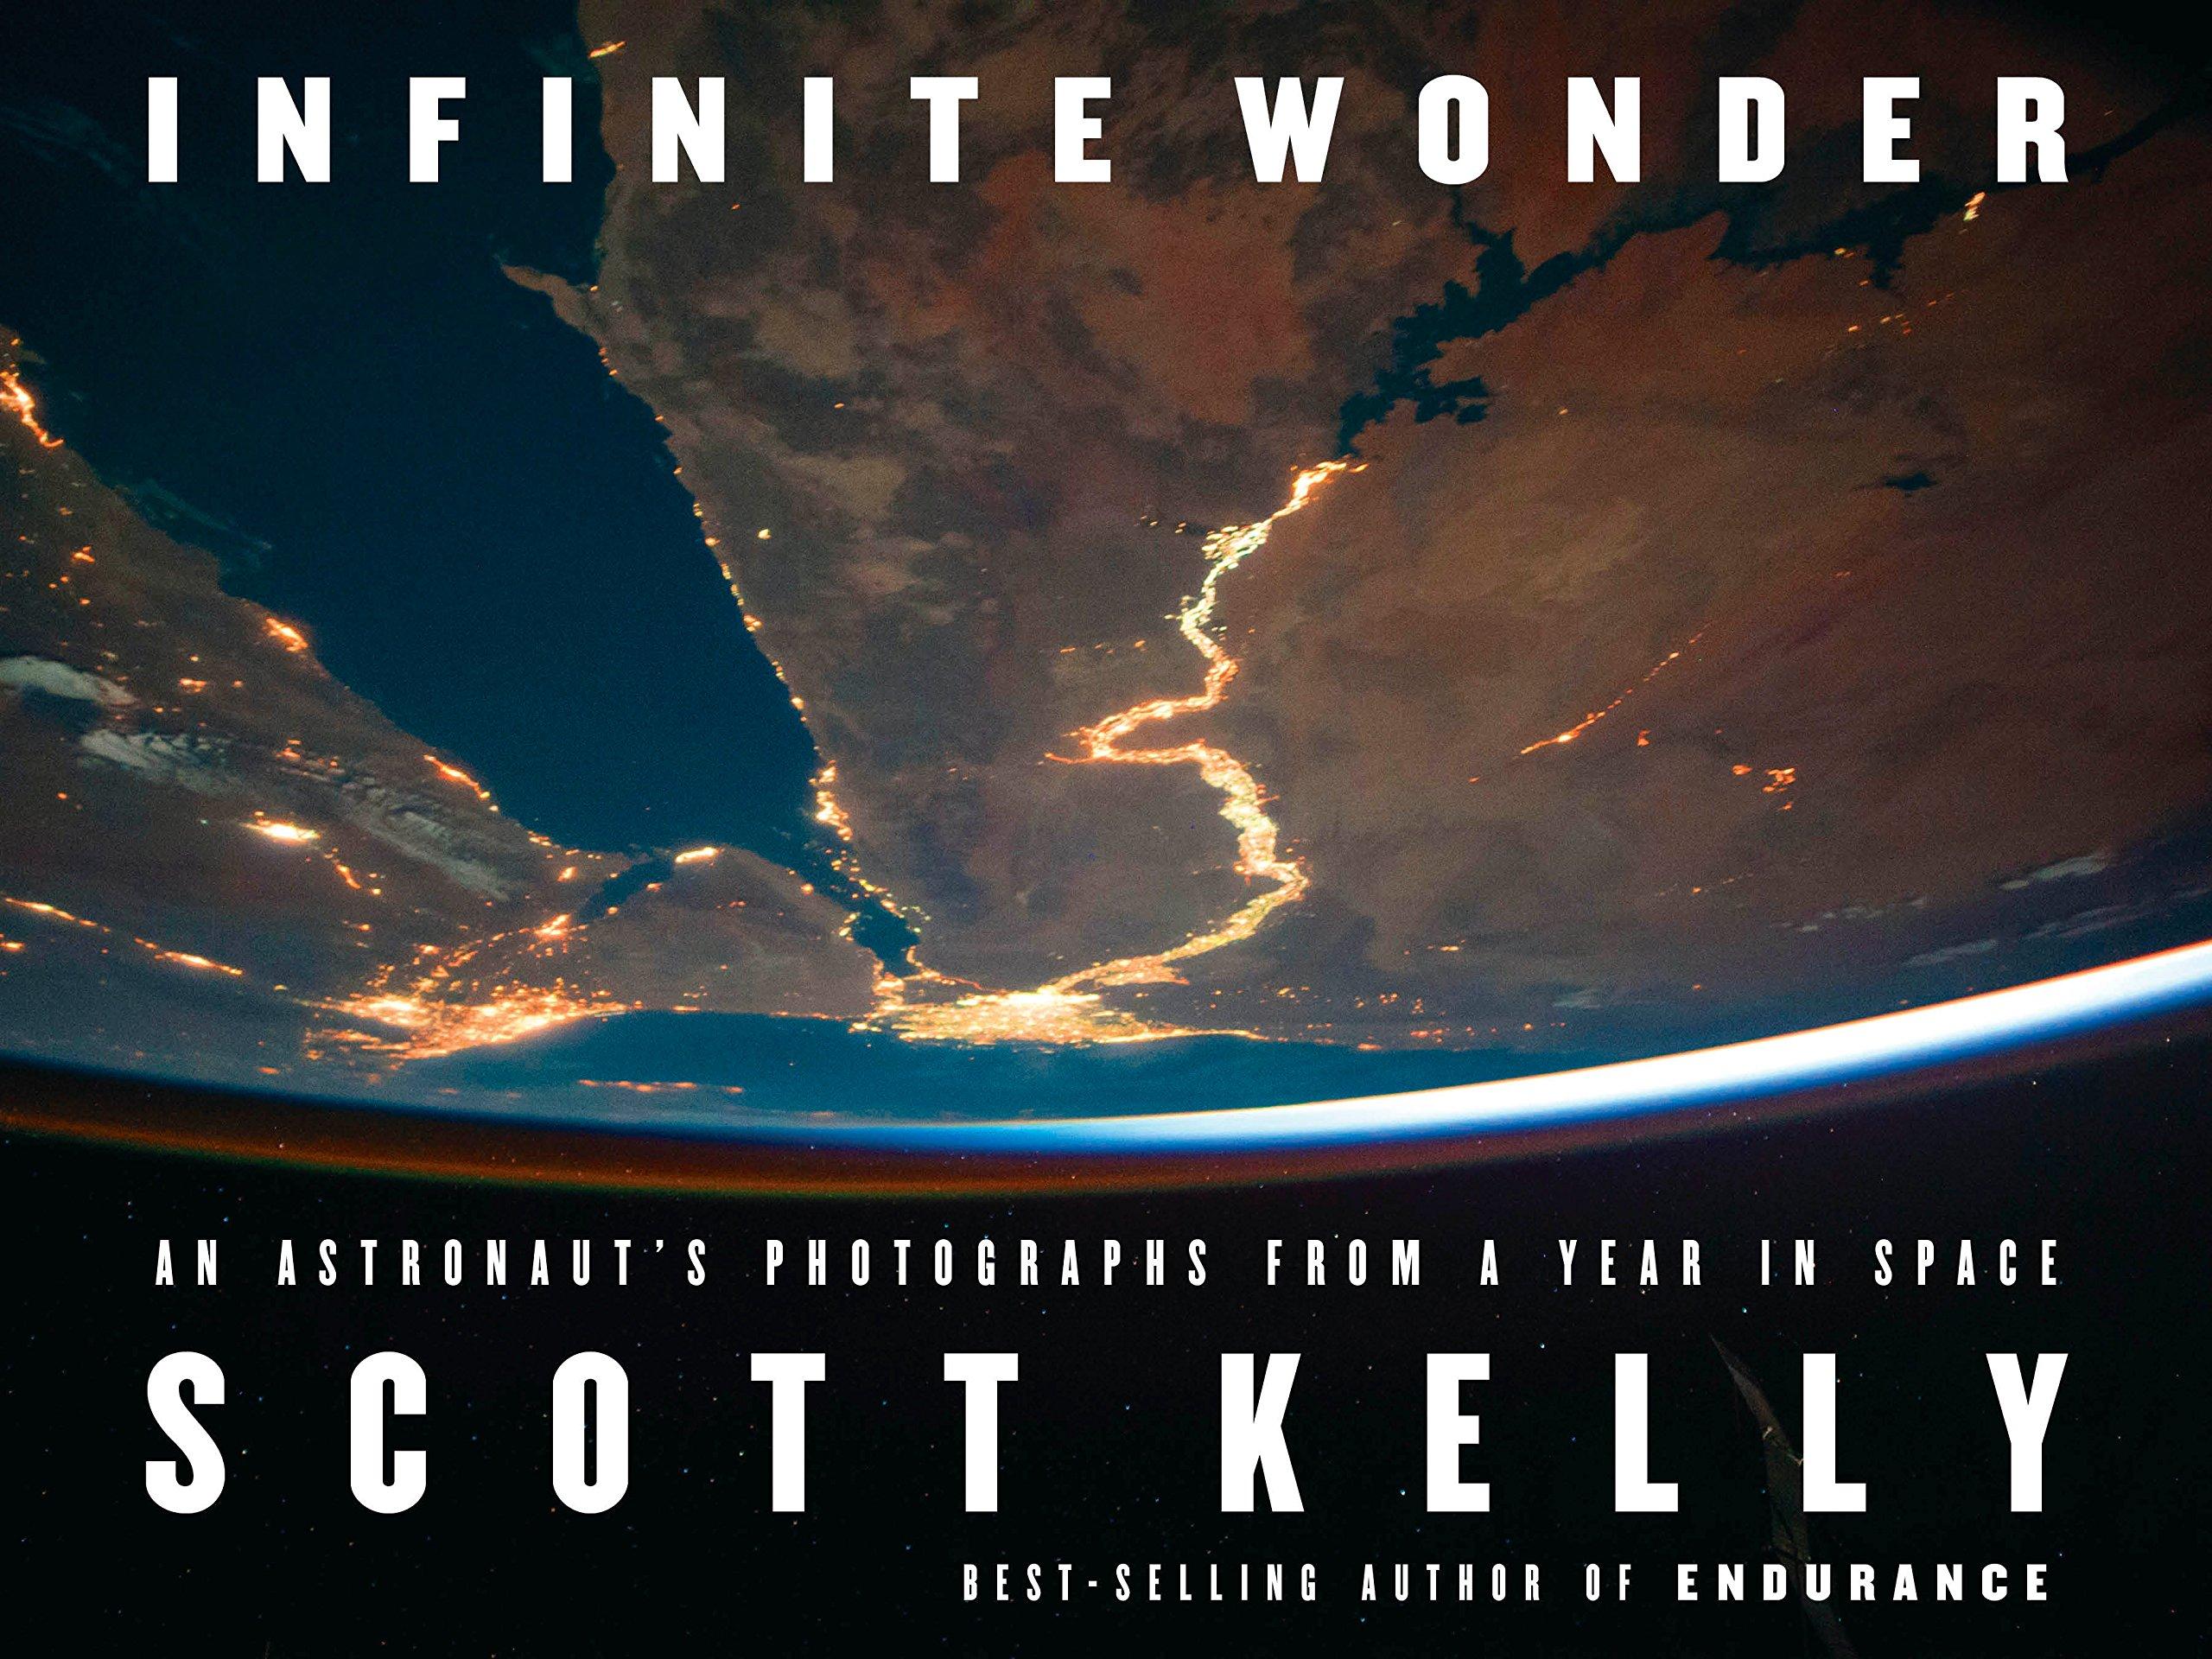 Infinite Wonder: An Astronaut's Photographs from a Year in Space